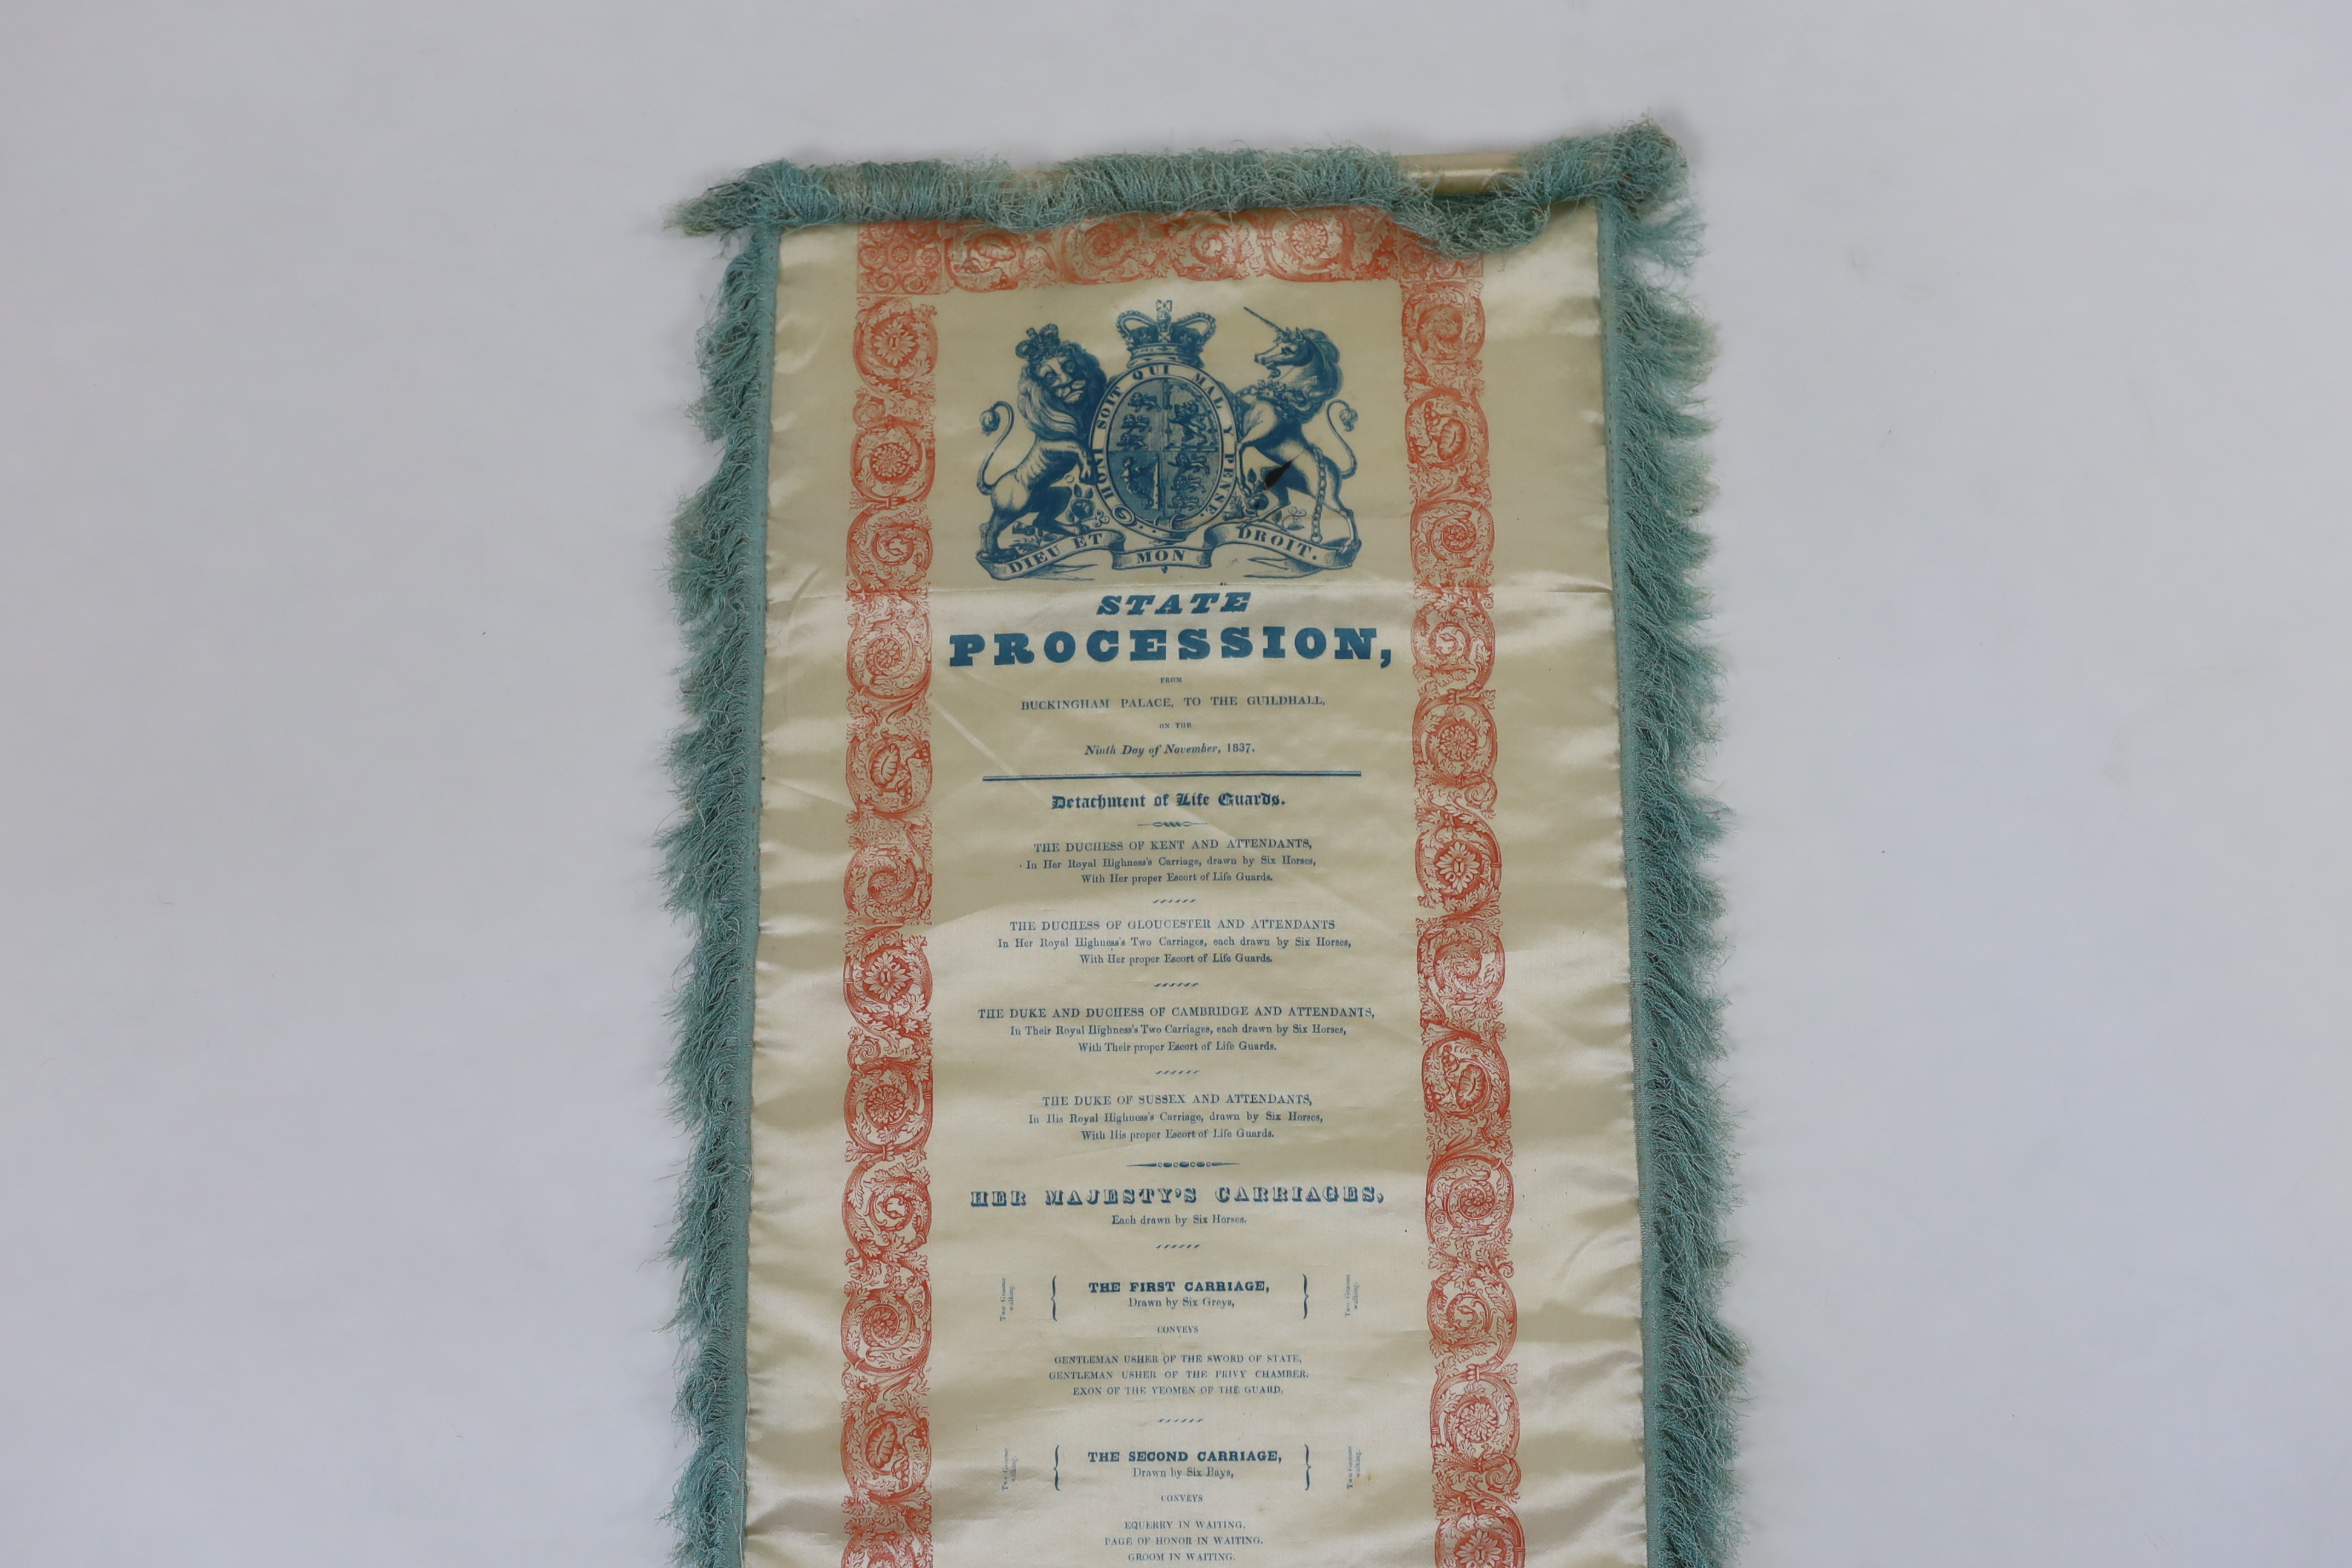 A silk banner; State Procession from Buckingham Palace to The Guildhall on the Ninth Day of November 1837. The day of Queen Victoria’s Coronation. Printed with the Royal Coat of Arms and a list of the guards, carriages a